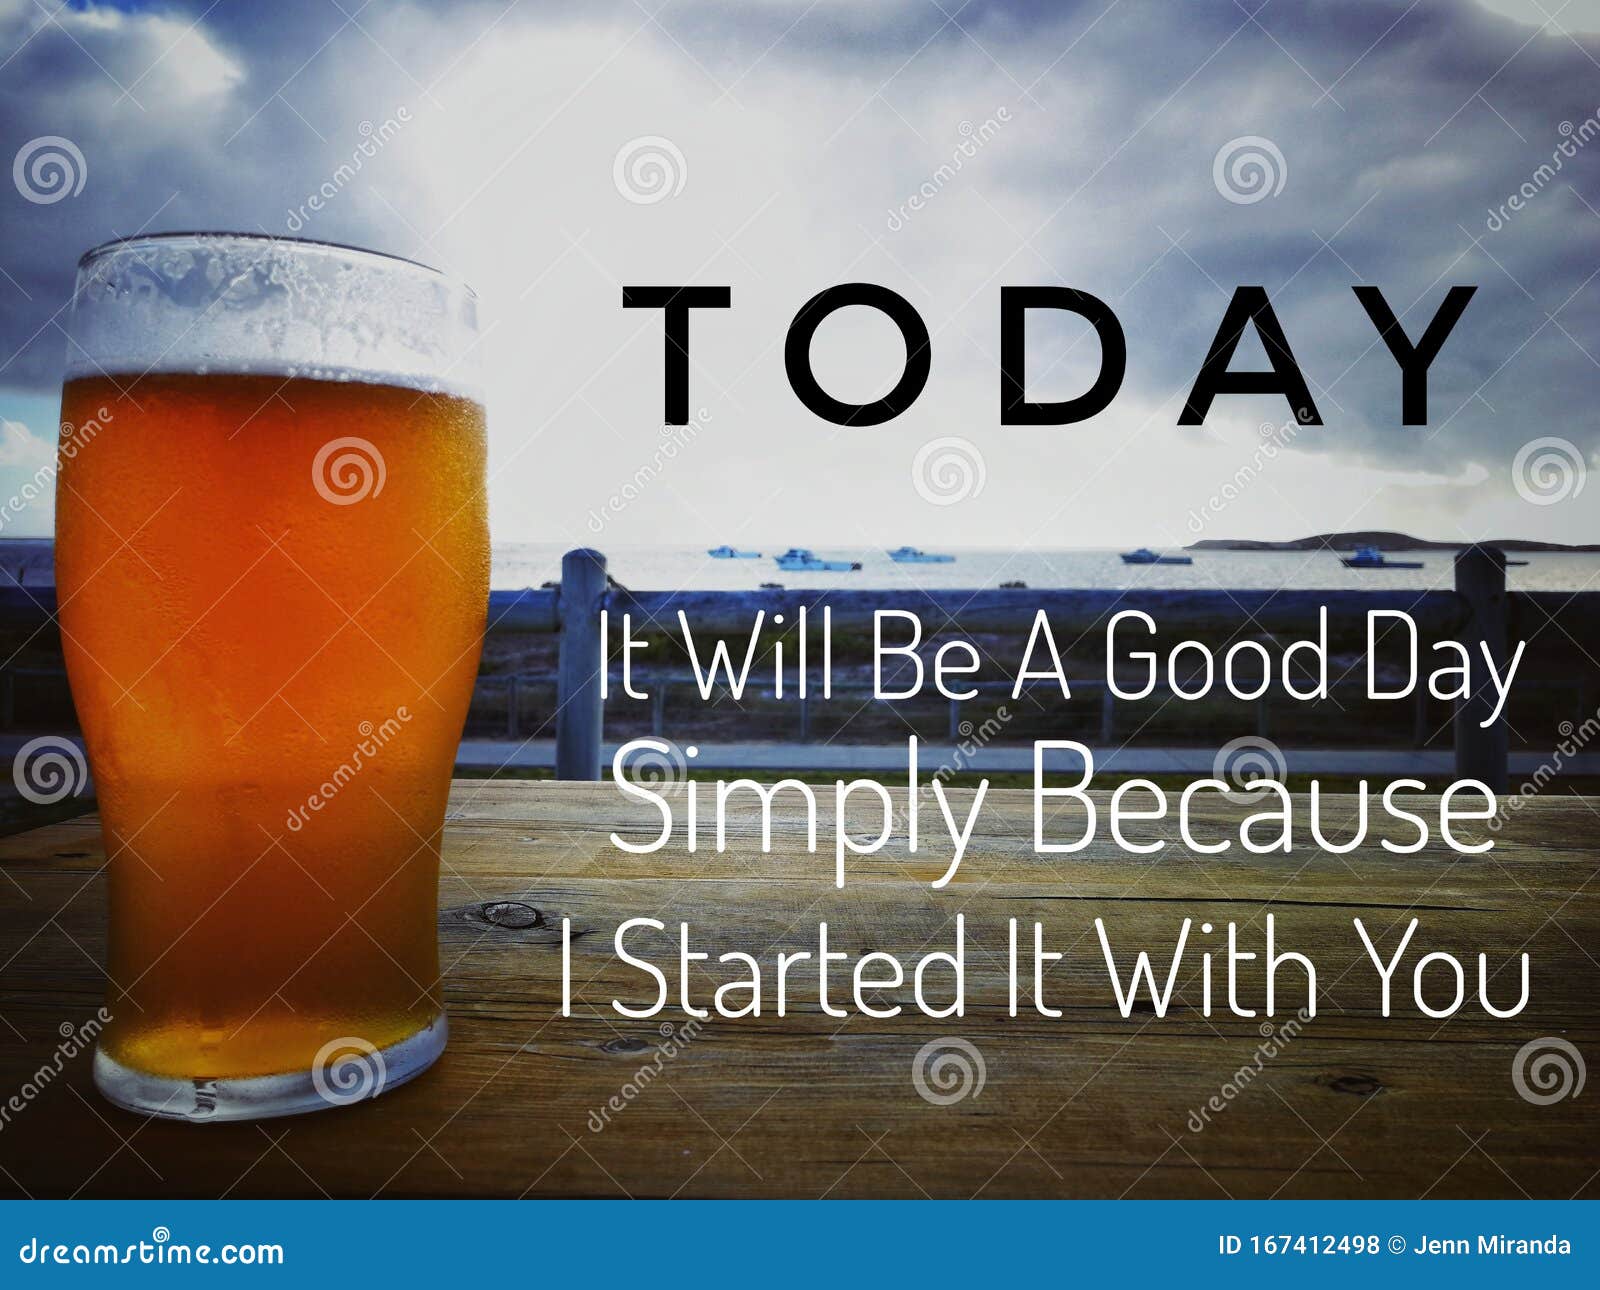 Quote about drinking beer stock photo. Image of message - 167412498